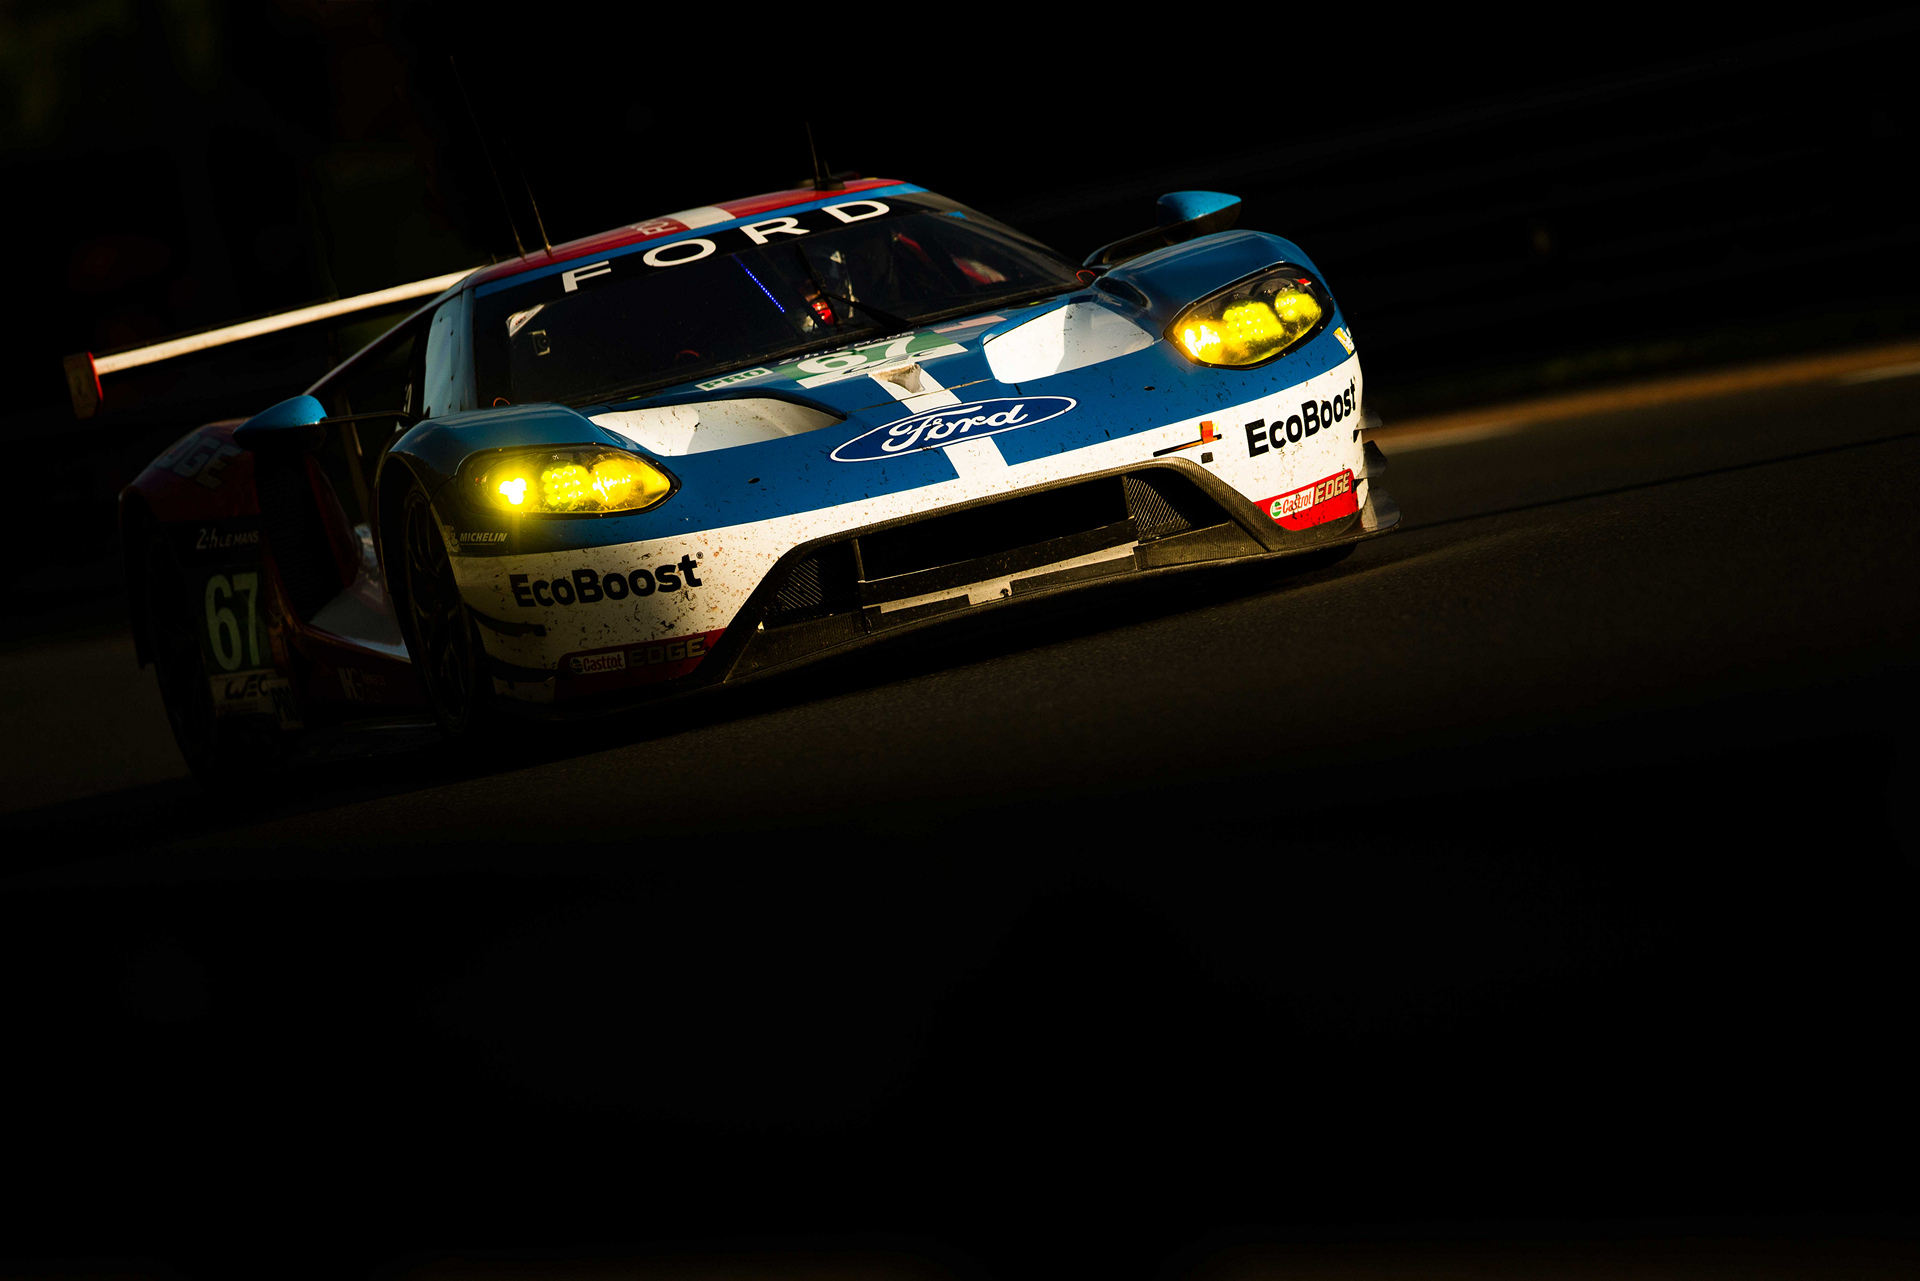 Ford GT wins class at 24 Hours of Le Mans © Ford Motor Company